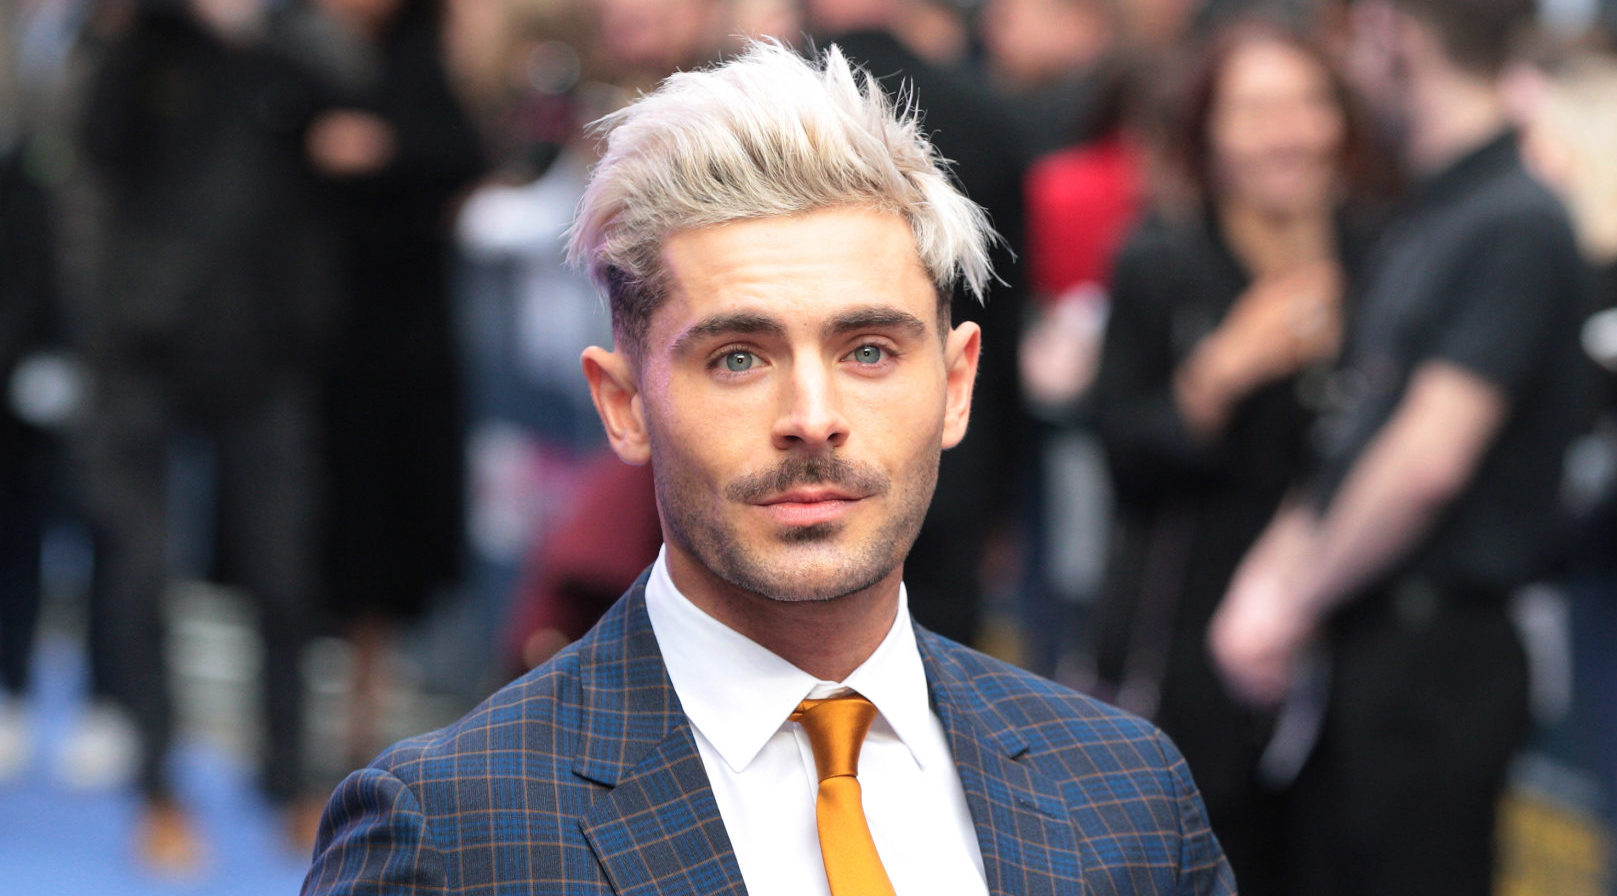 Zac Efron to Star in 'Three Men and a Baby' Remake for Disney+